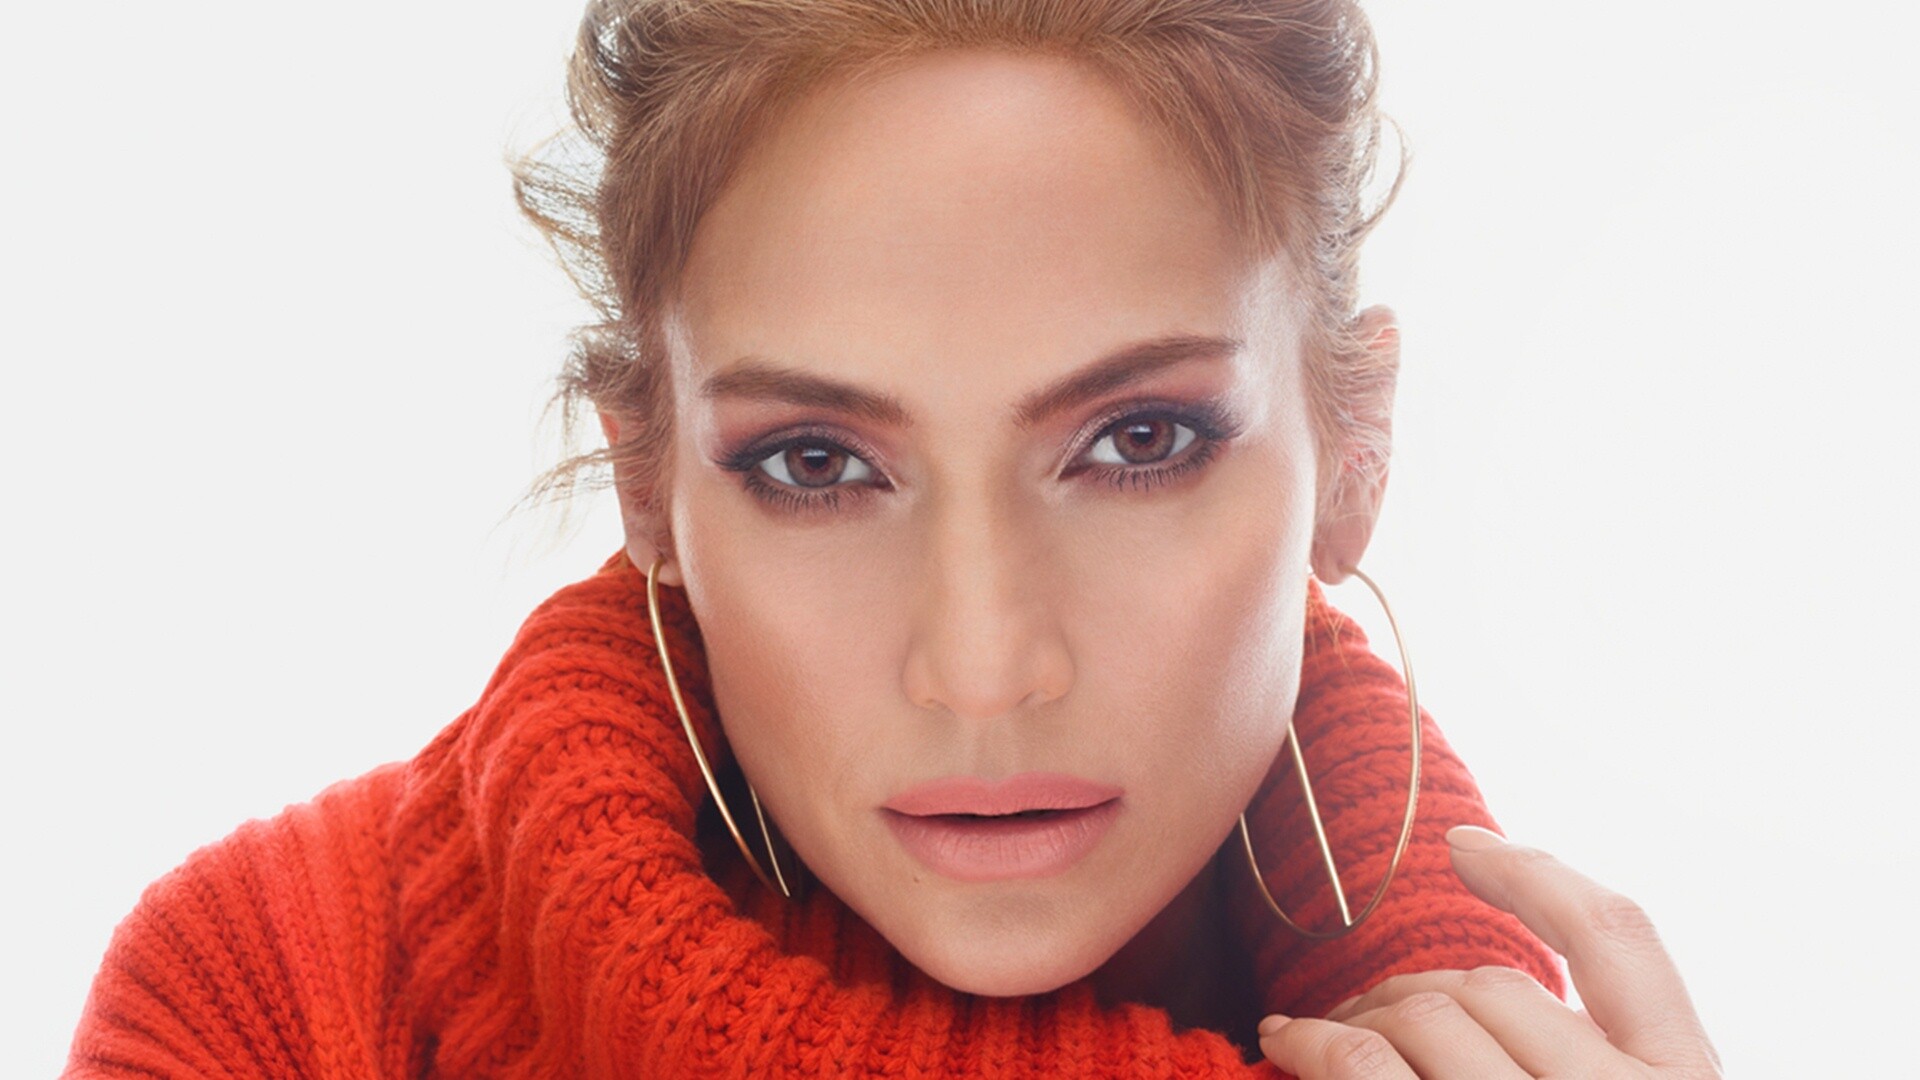 Jennifer Lopez: Ranked the world's most powerful celebrity by Forbes, 2012. 1920x1080 Full HD Background.